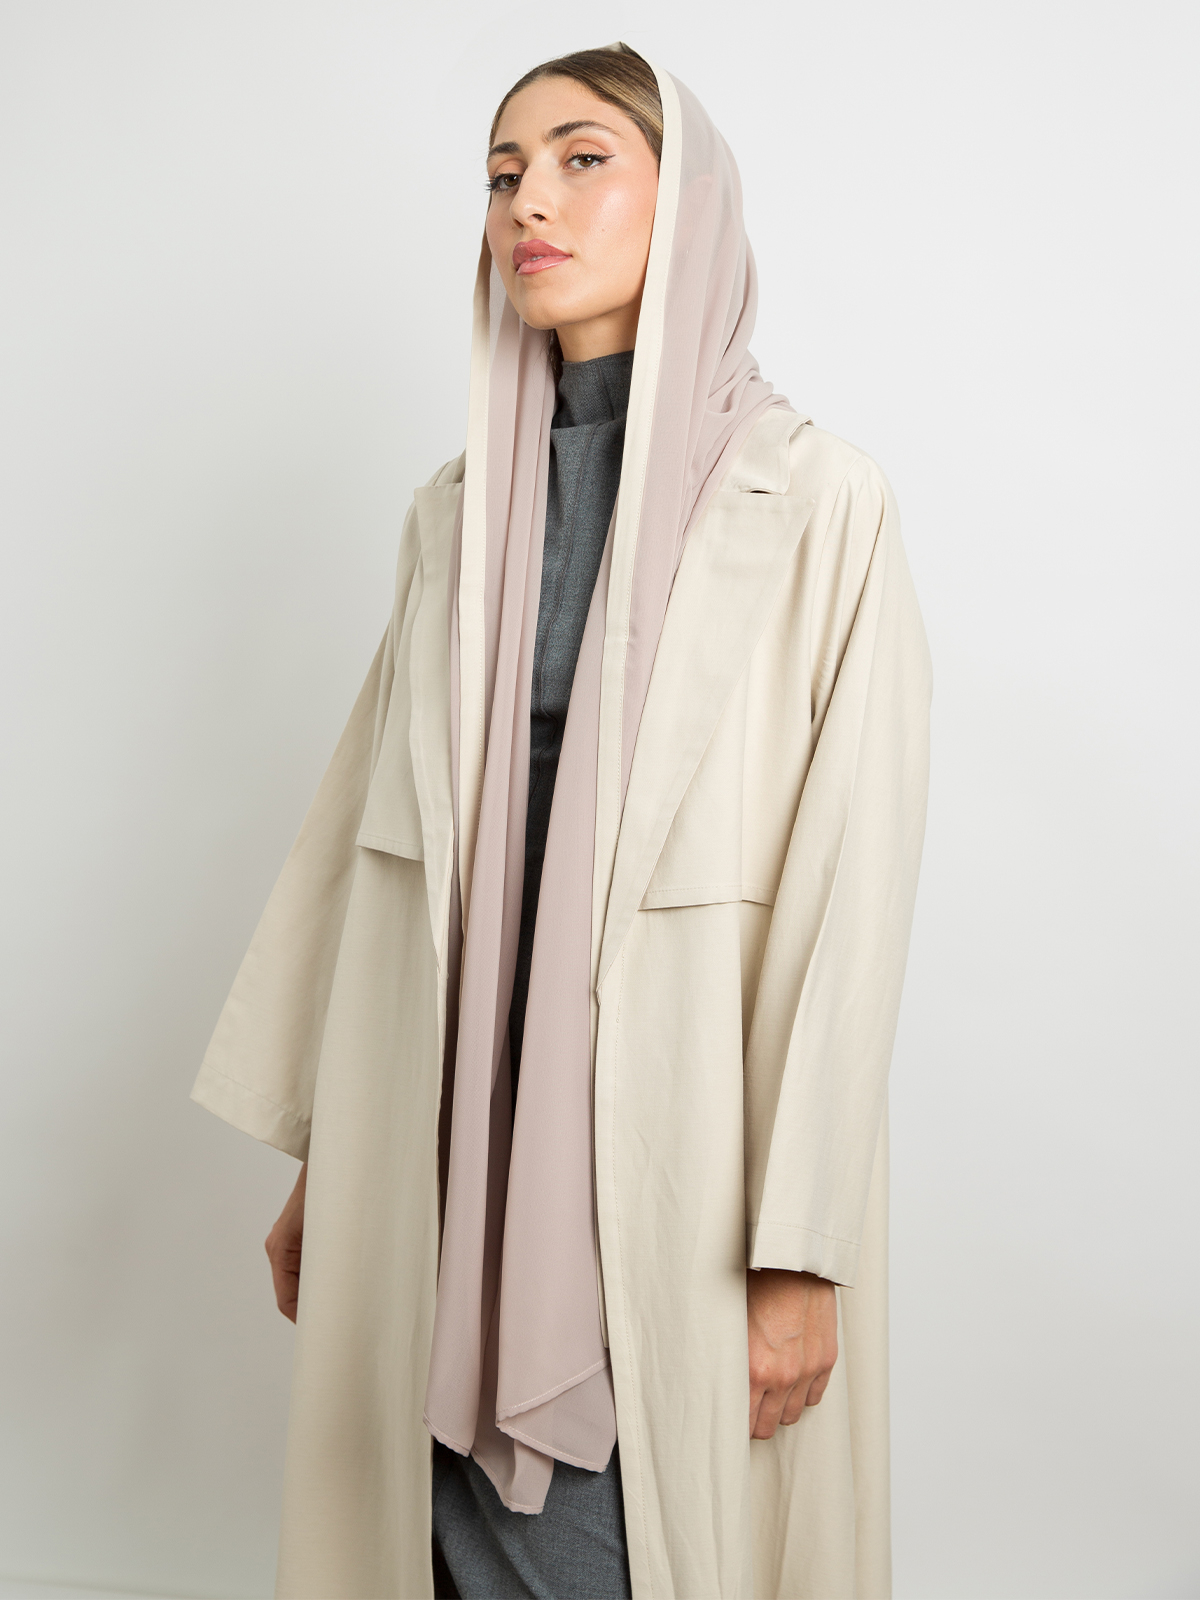 Beige long open A cut trench coat winter abaya in soft and cupro fabric by kaafmeem for work and different occasions 